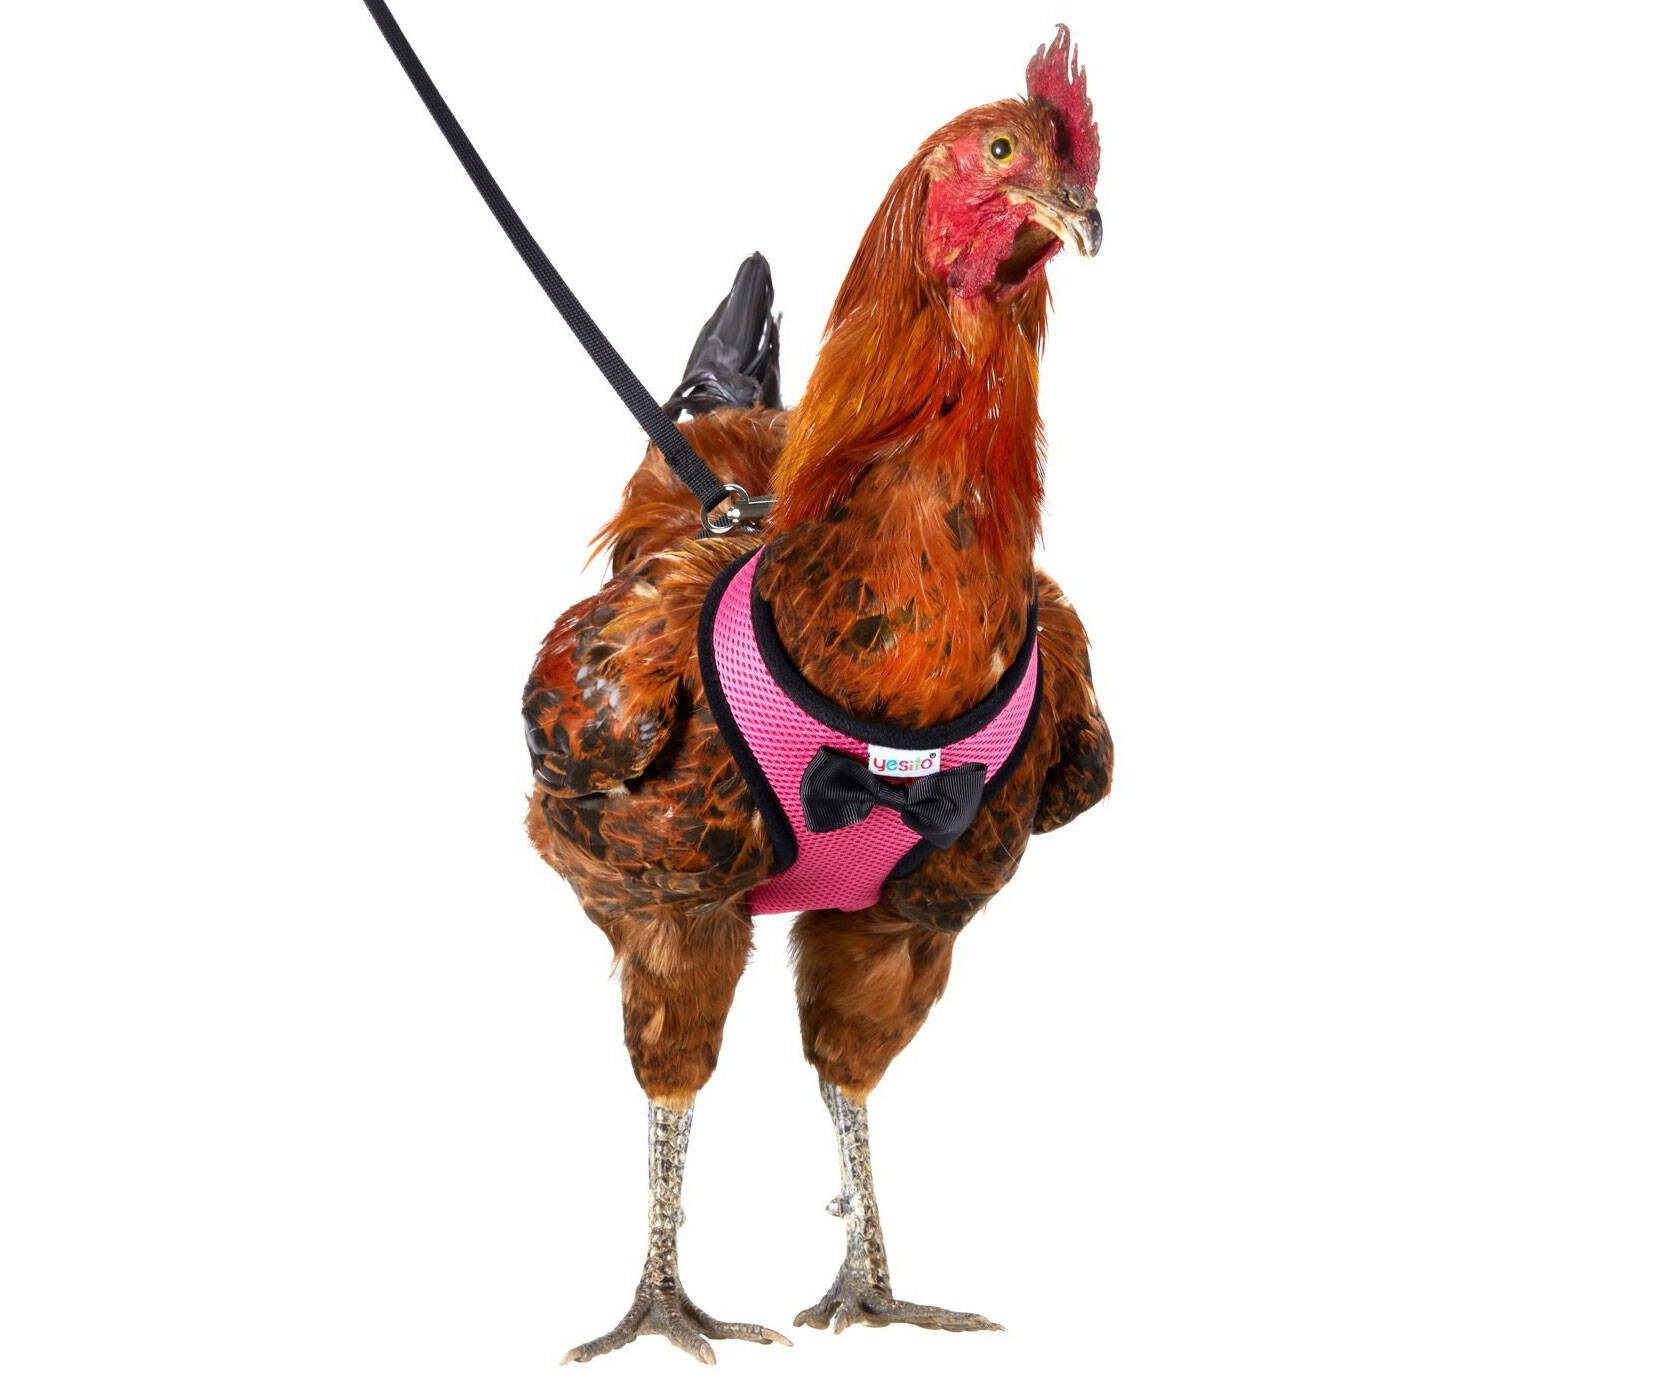 Chicken Harness And Leash - coolthings.us